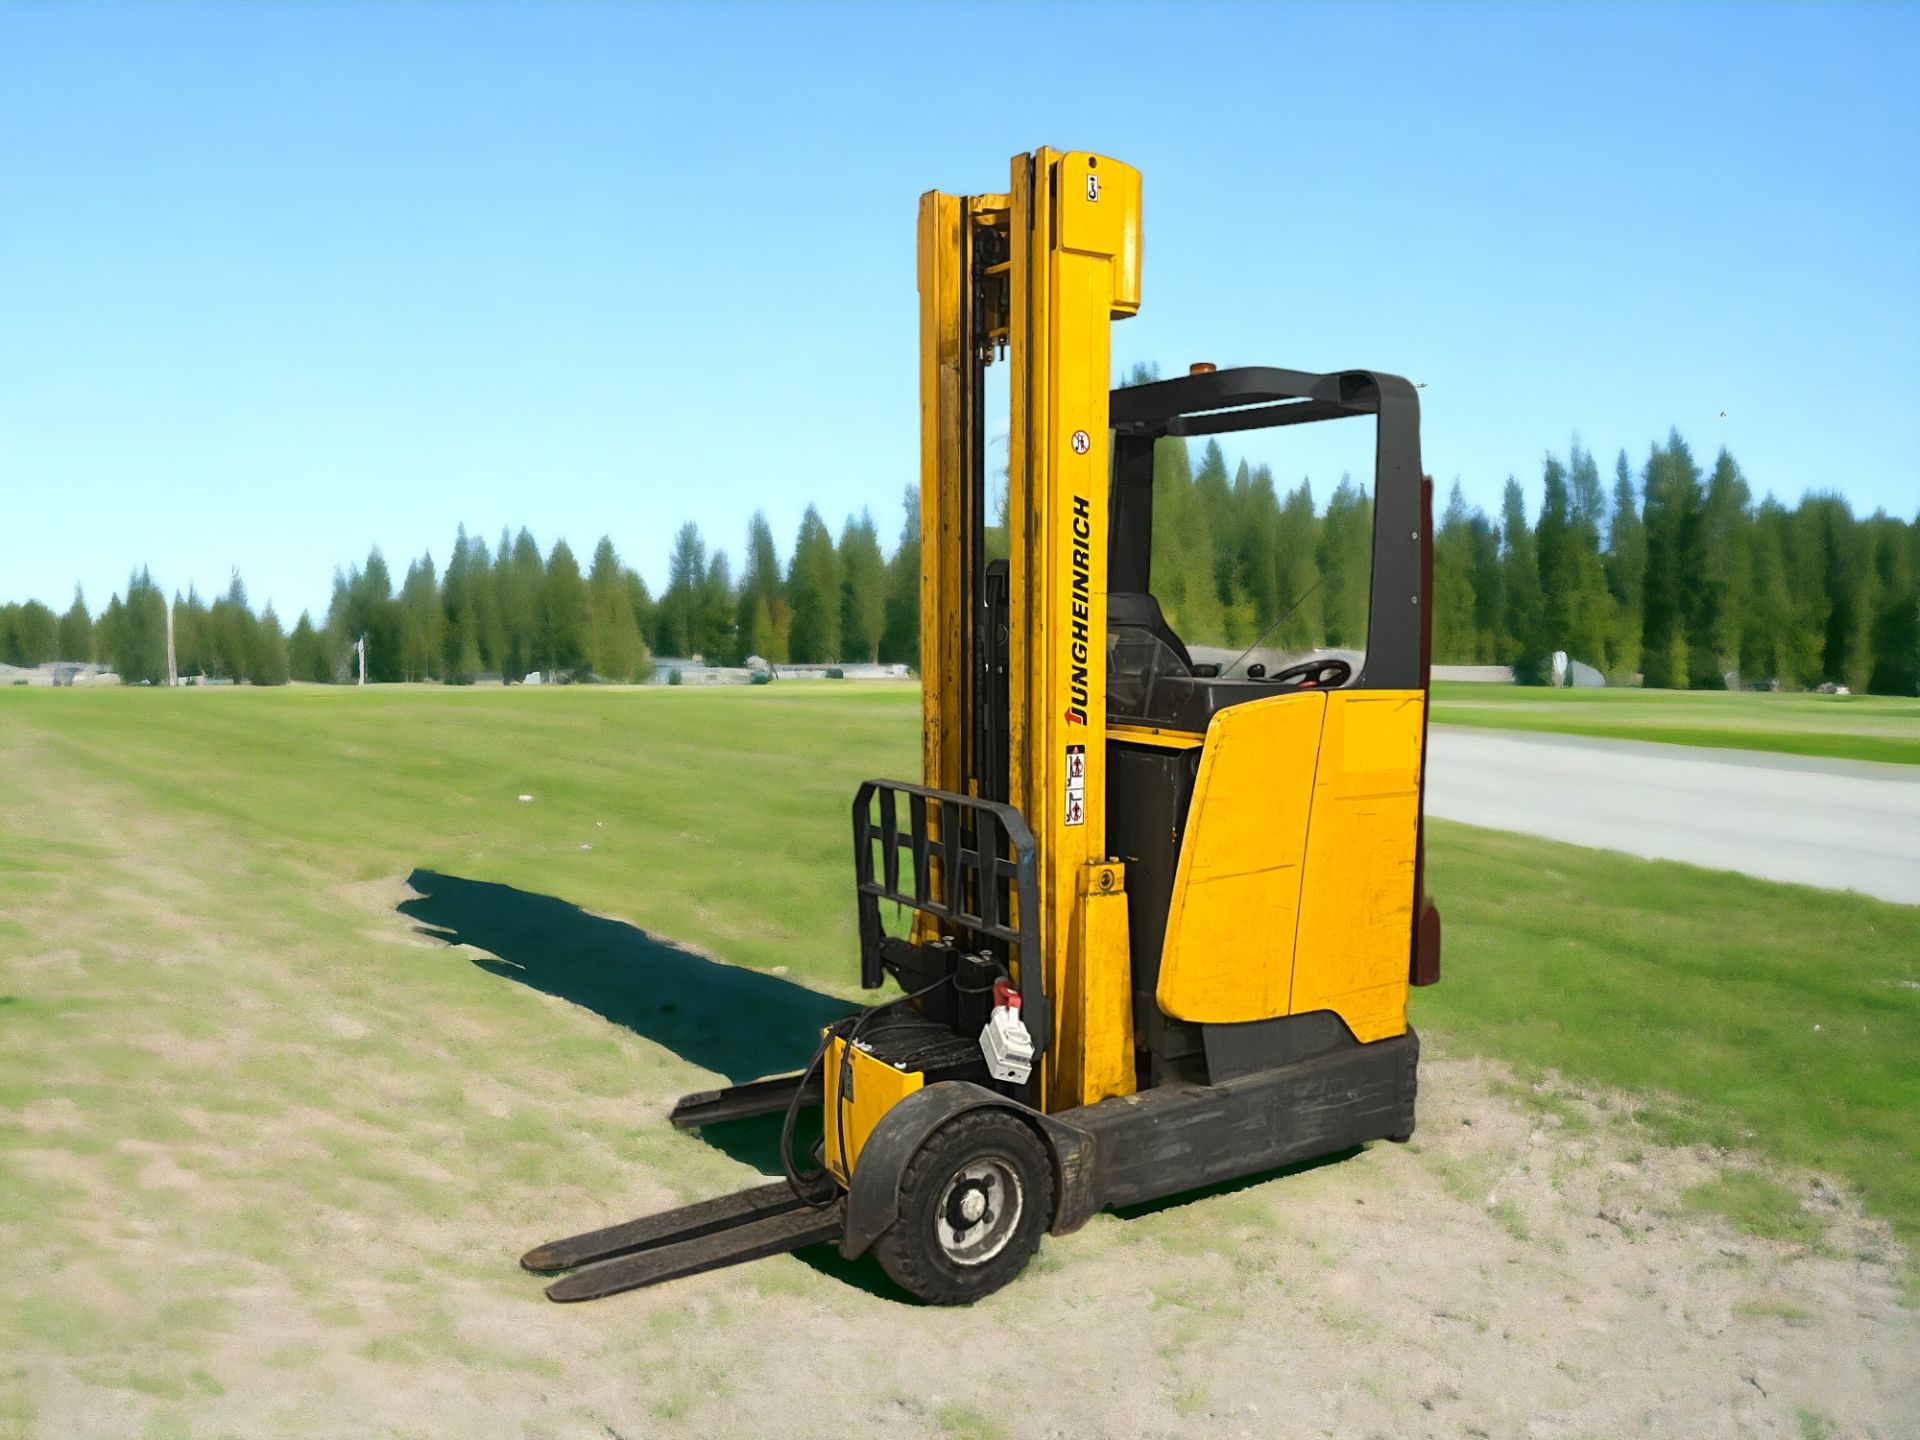 JUNGHEINRICH REACH TRUCK ETVC 16: POWERFUL ELECTRIC WORKHORSE WITH LOW HOURS **(INCLUDES CHARGER)** - Image 6 of 6